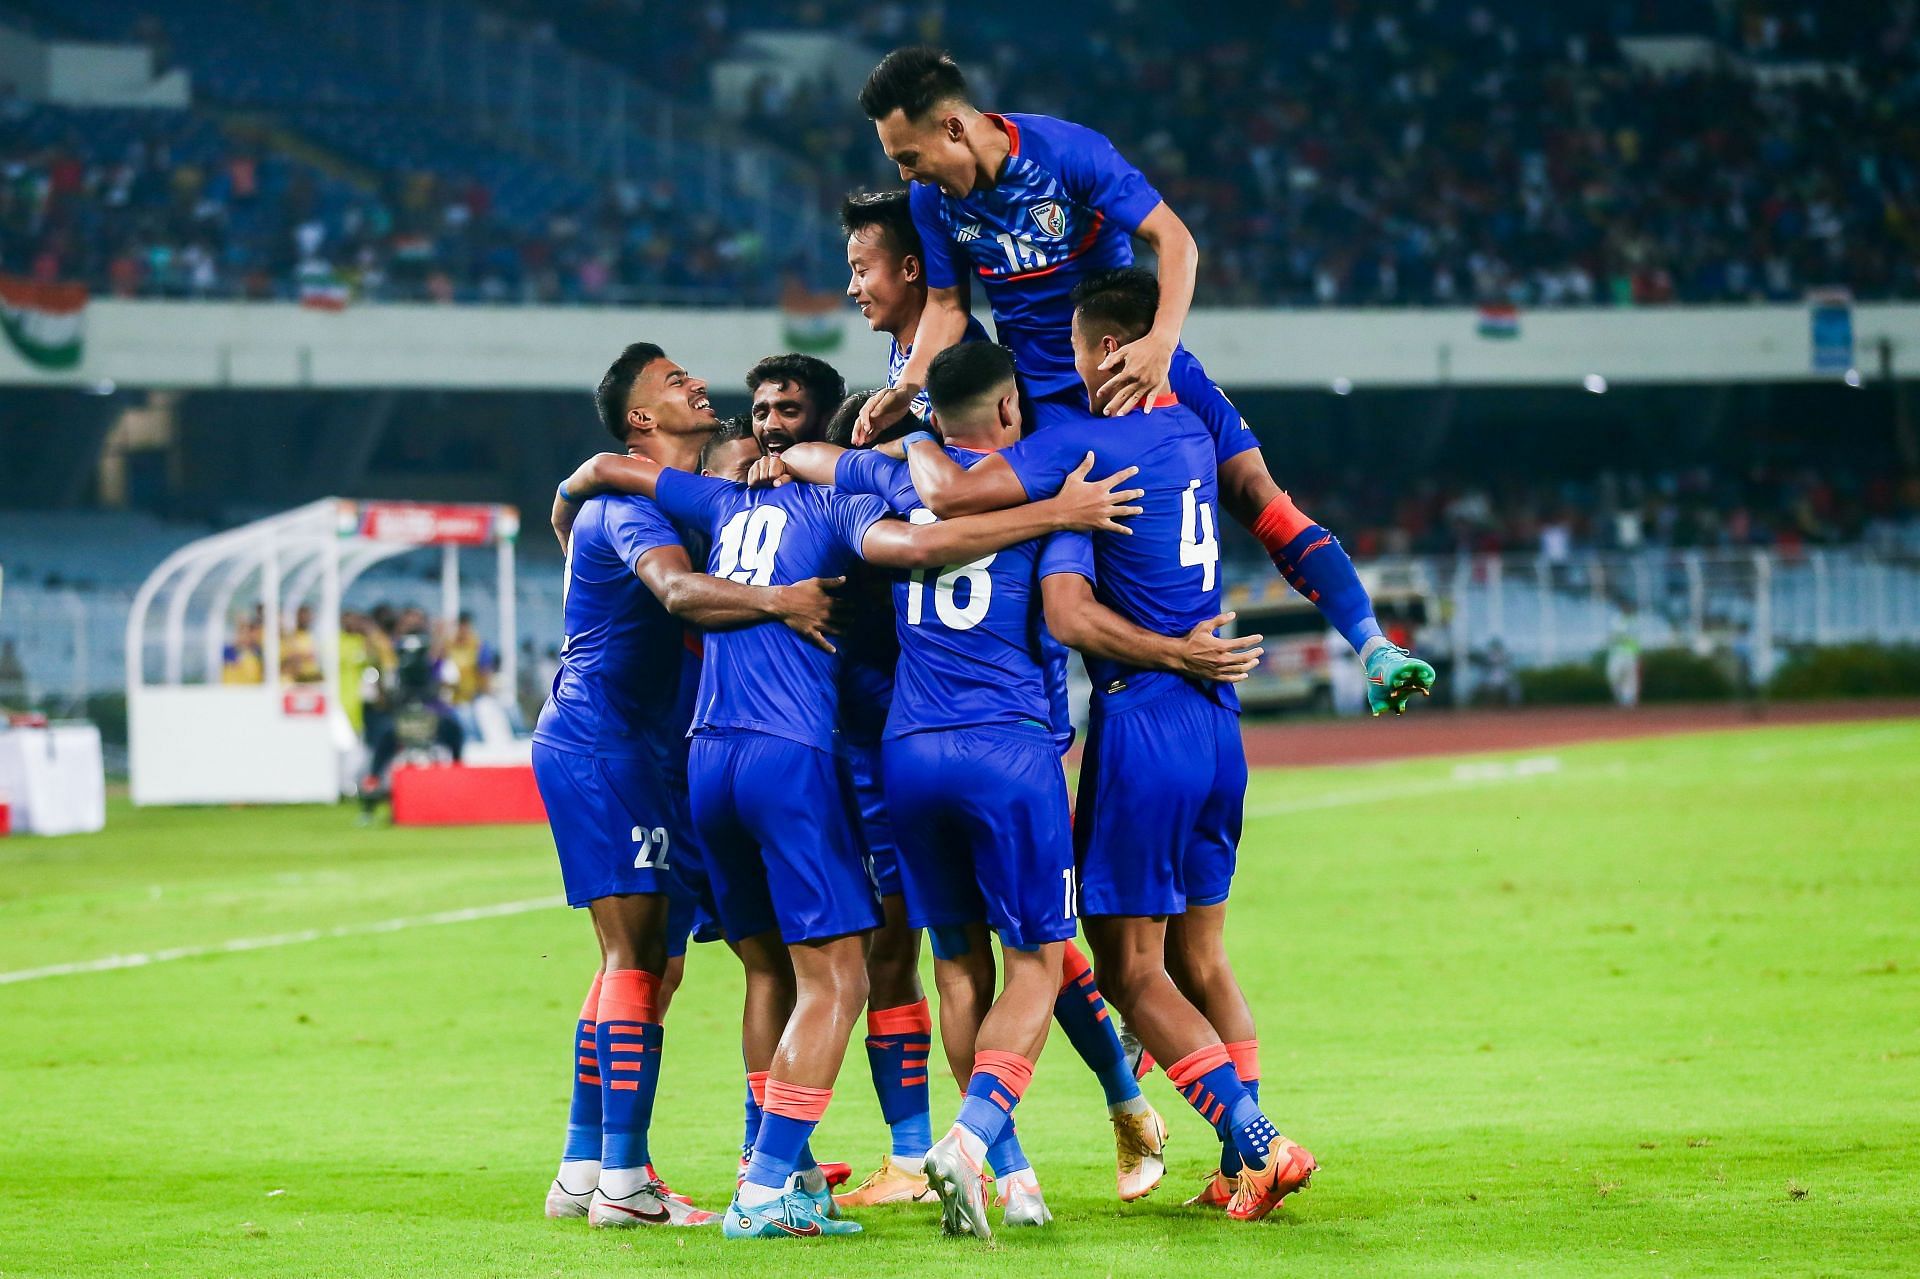 India qualified for the AFC Asian Cup 2023 as group leaders. (Image courtesy: AIFF Media)